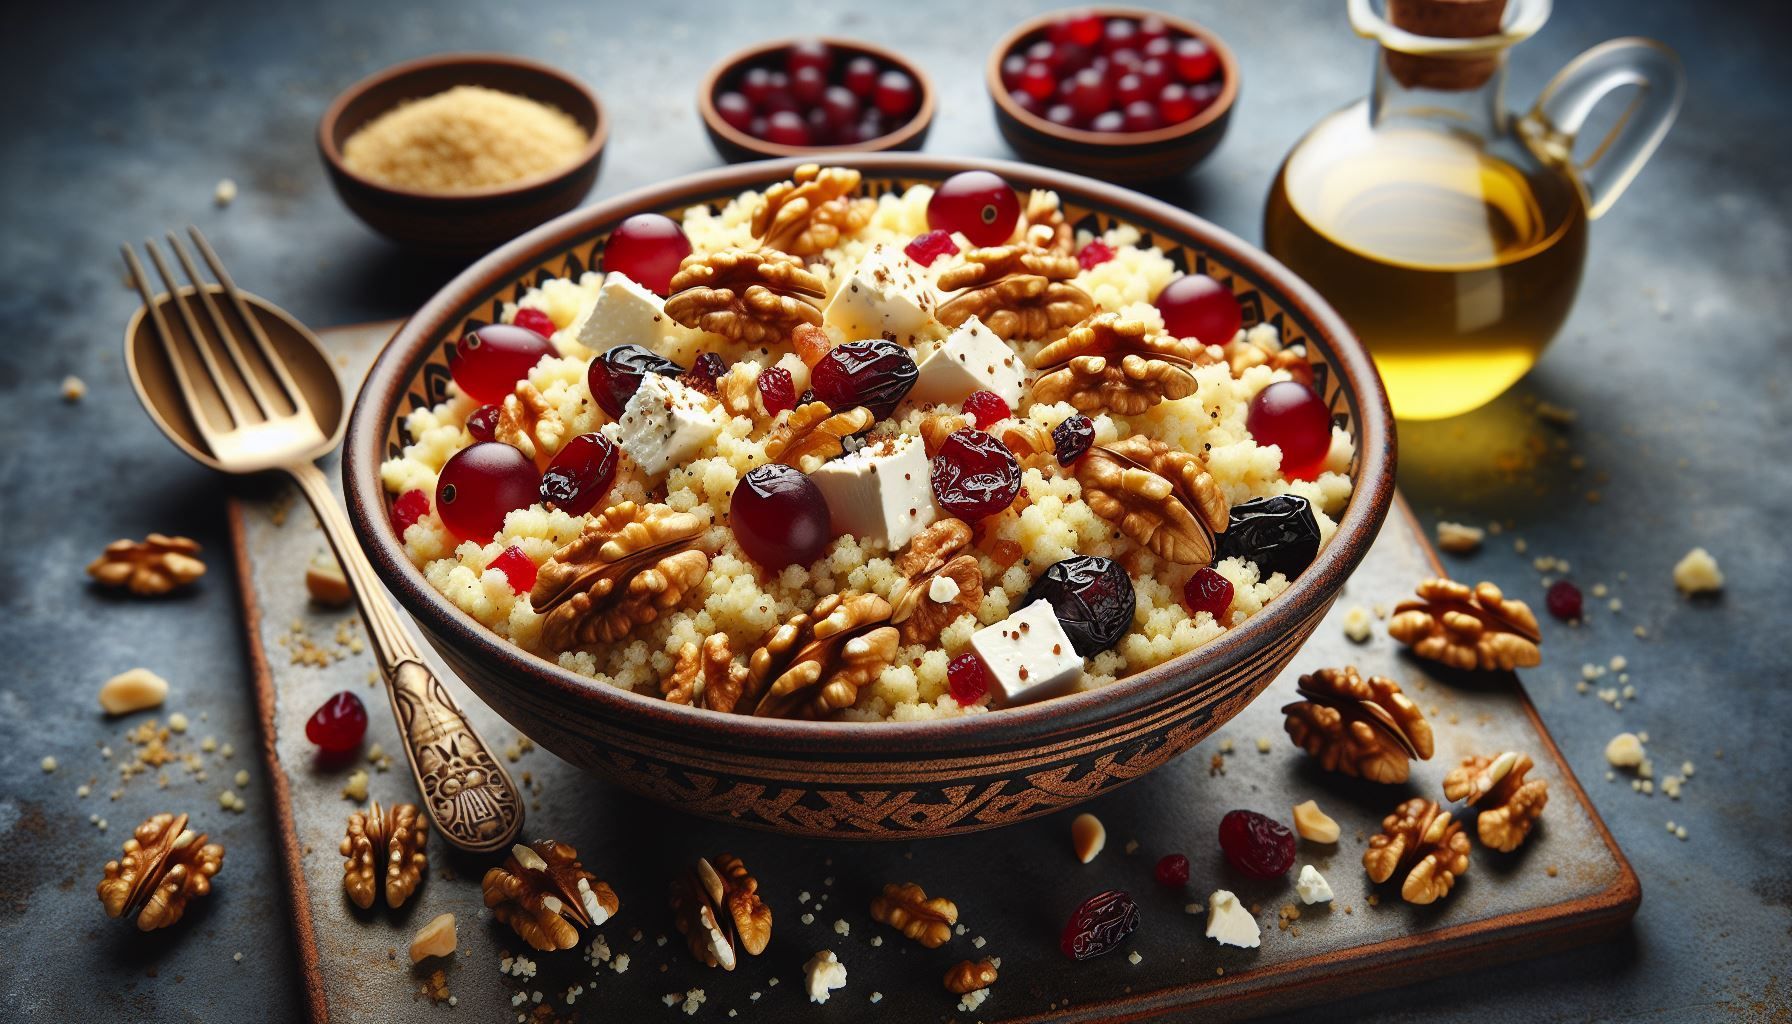 A bowl of food with nuts and cranberries on a table with a fork and spoon.